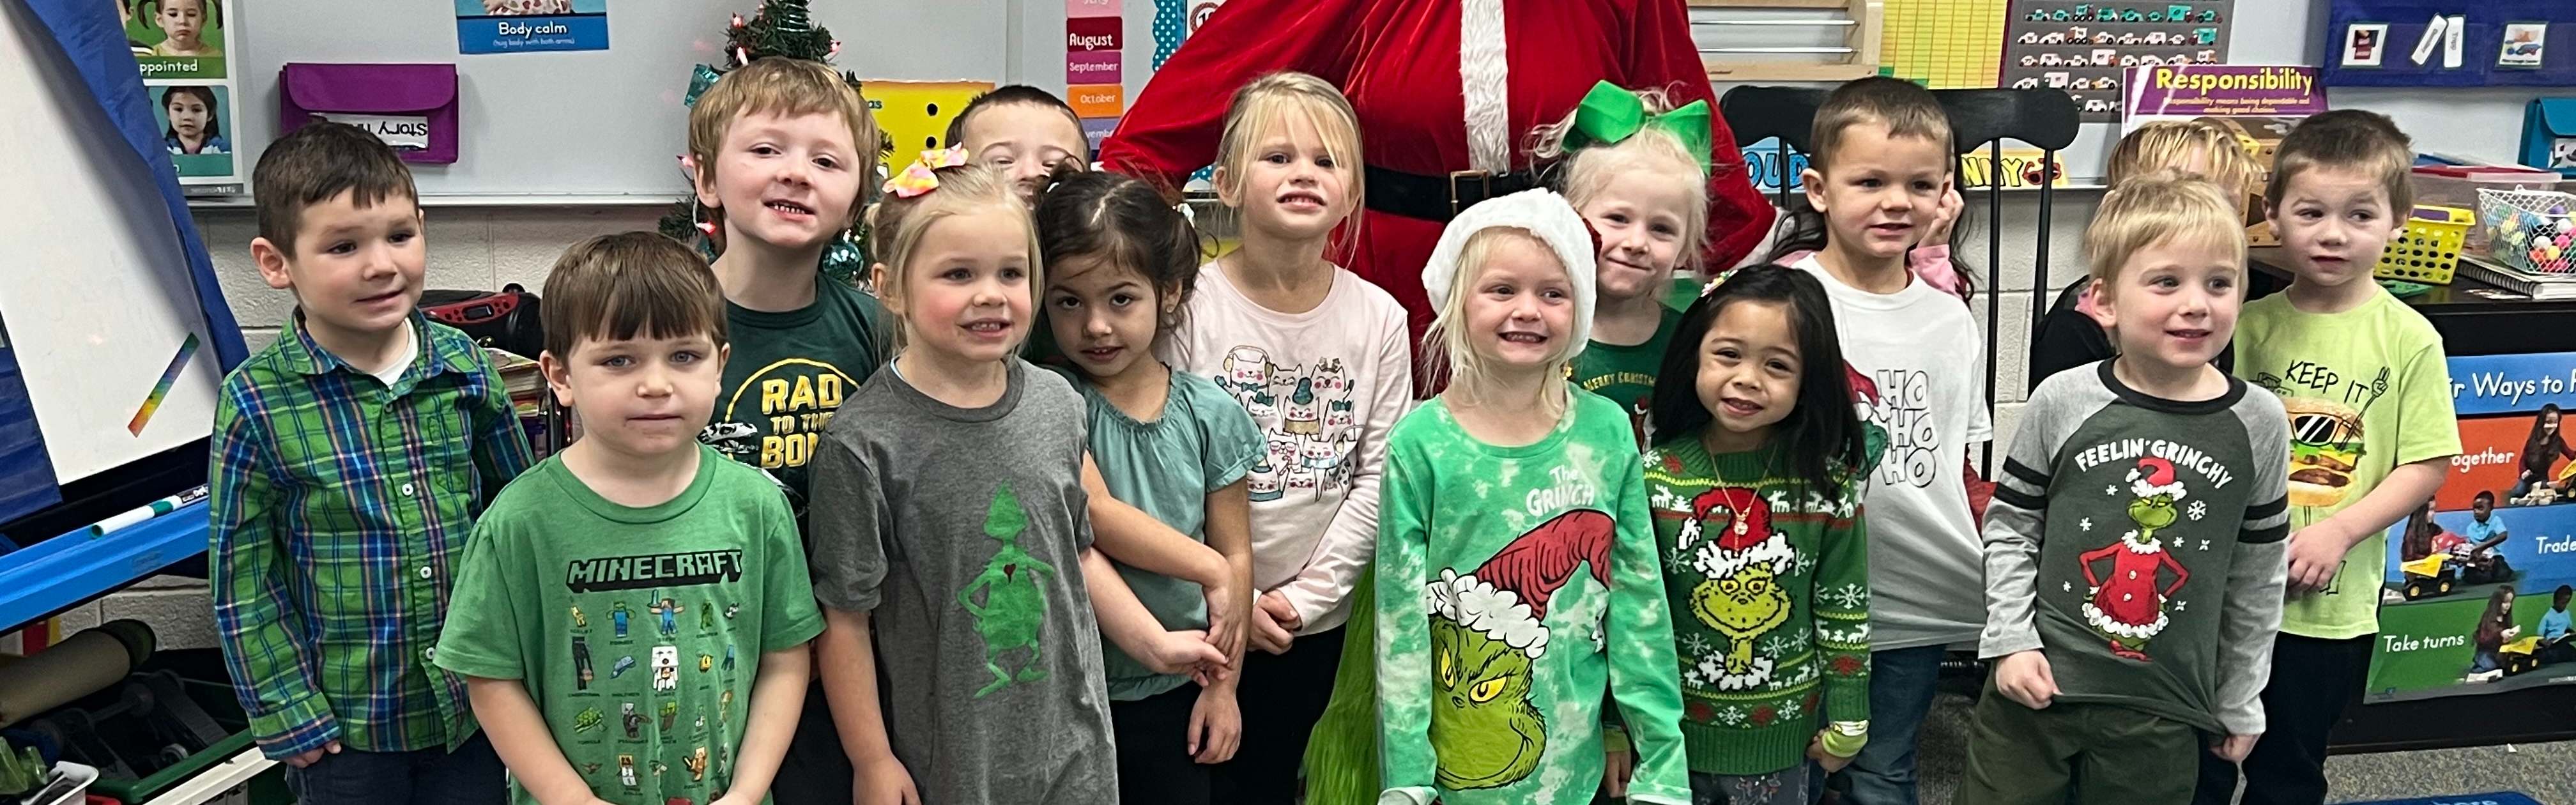 Picture of a preschool class standing together in the classroom before Christmas.